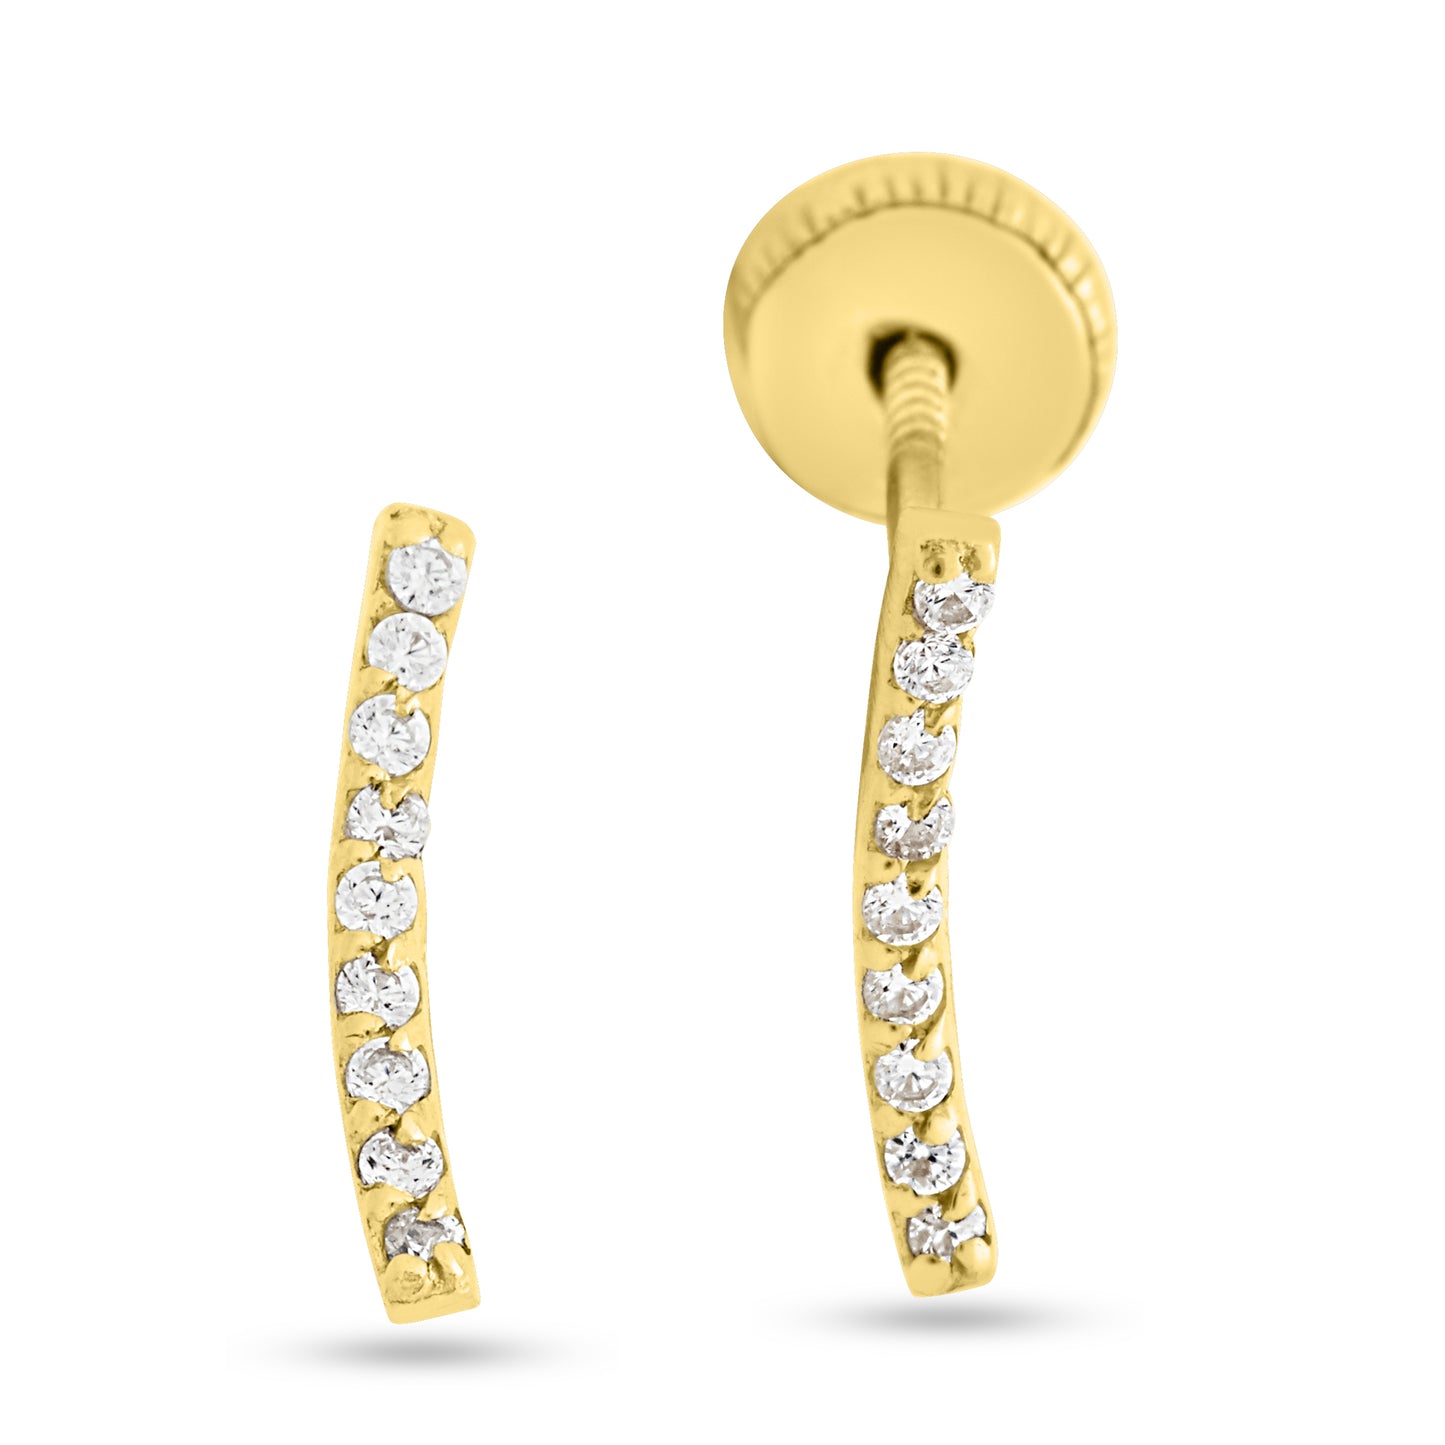 Small Curved Bar Cubic Zirconia Earrings 14K Yellow Gold (Just Arrived!)